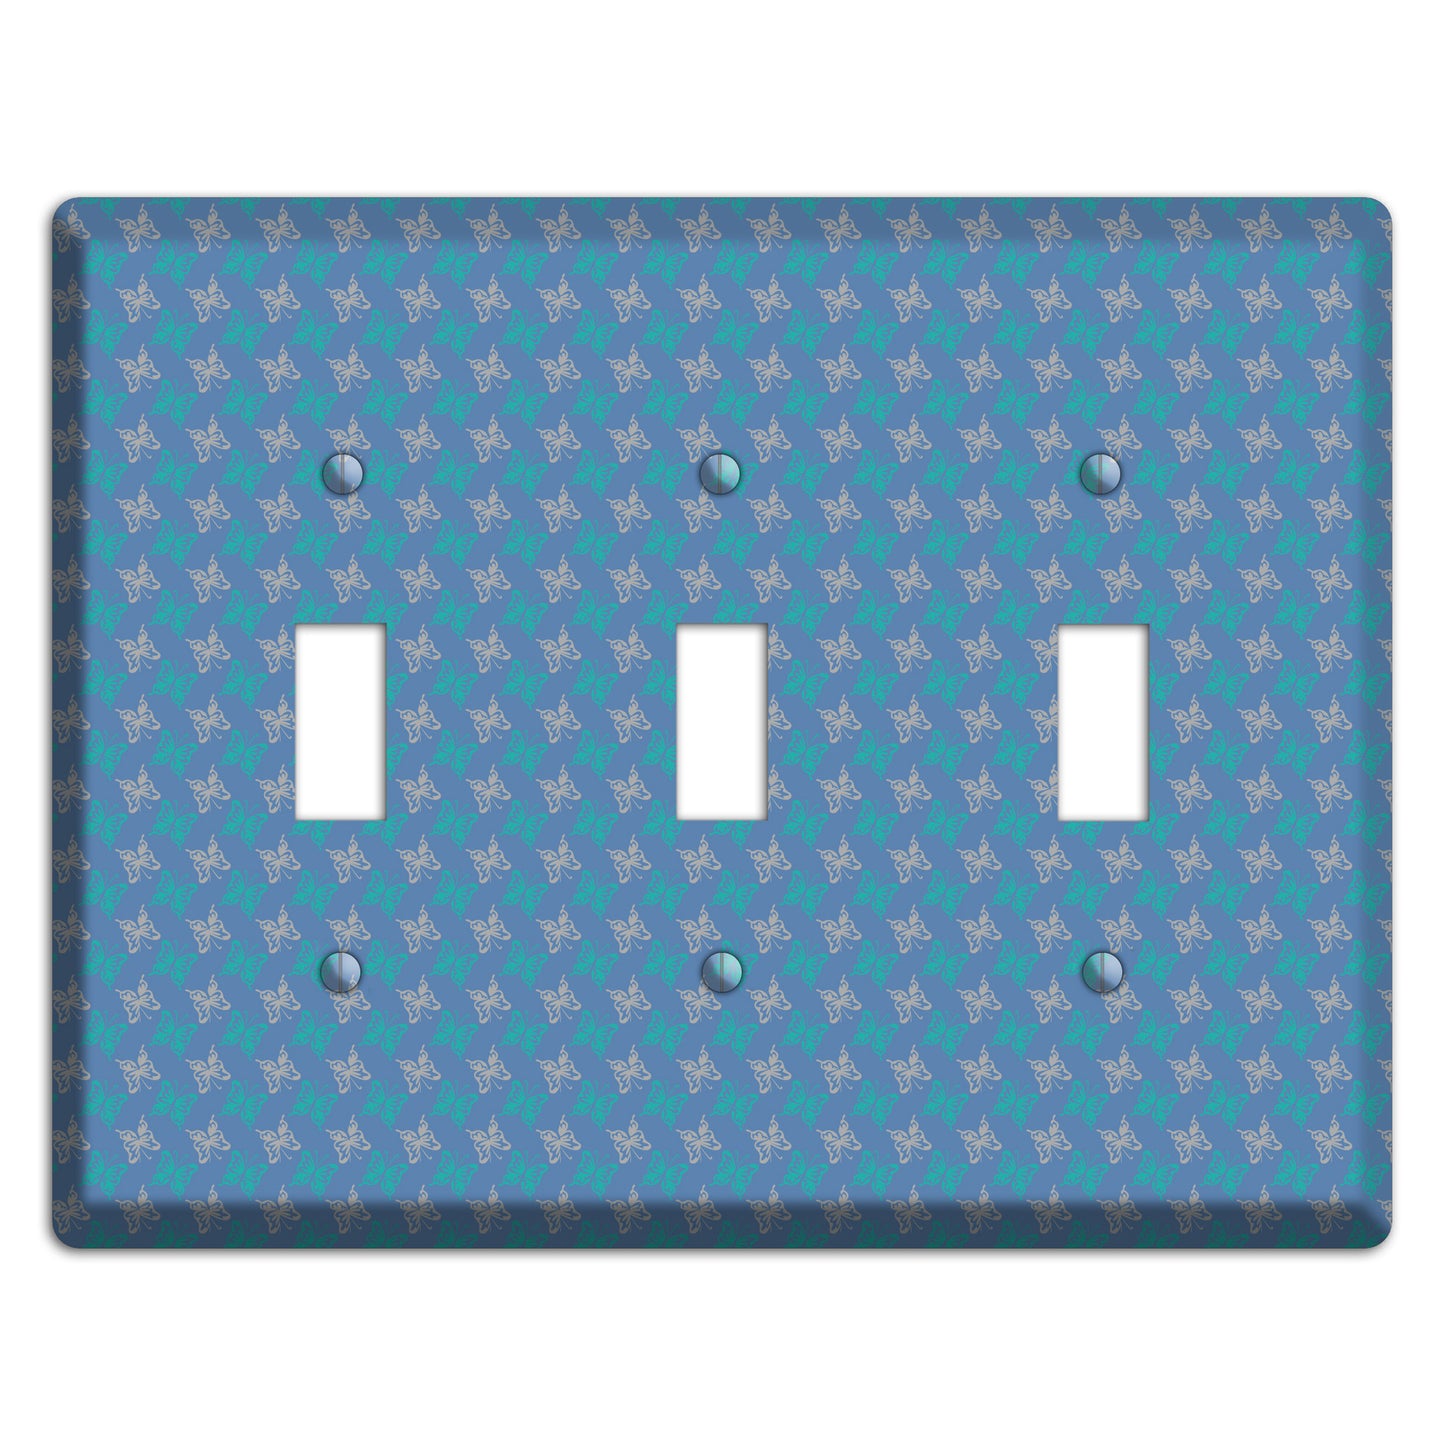 Blue with White and Turquoise Butterflies 3 Toggle Wallplate